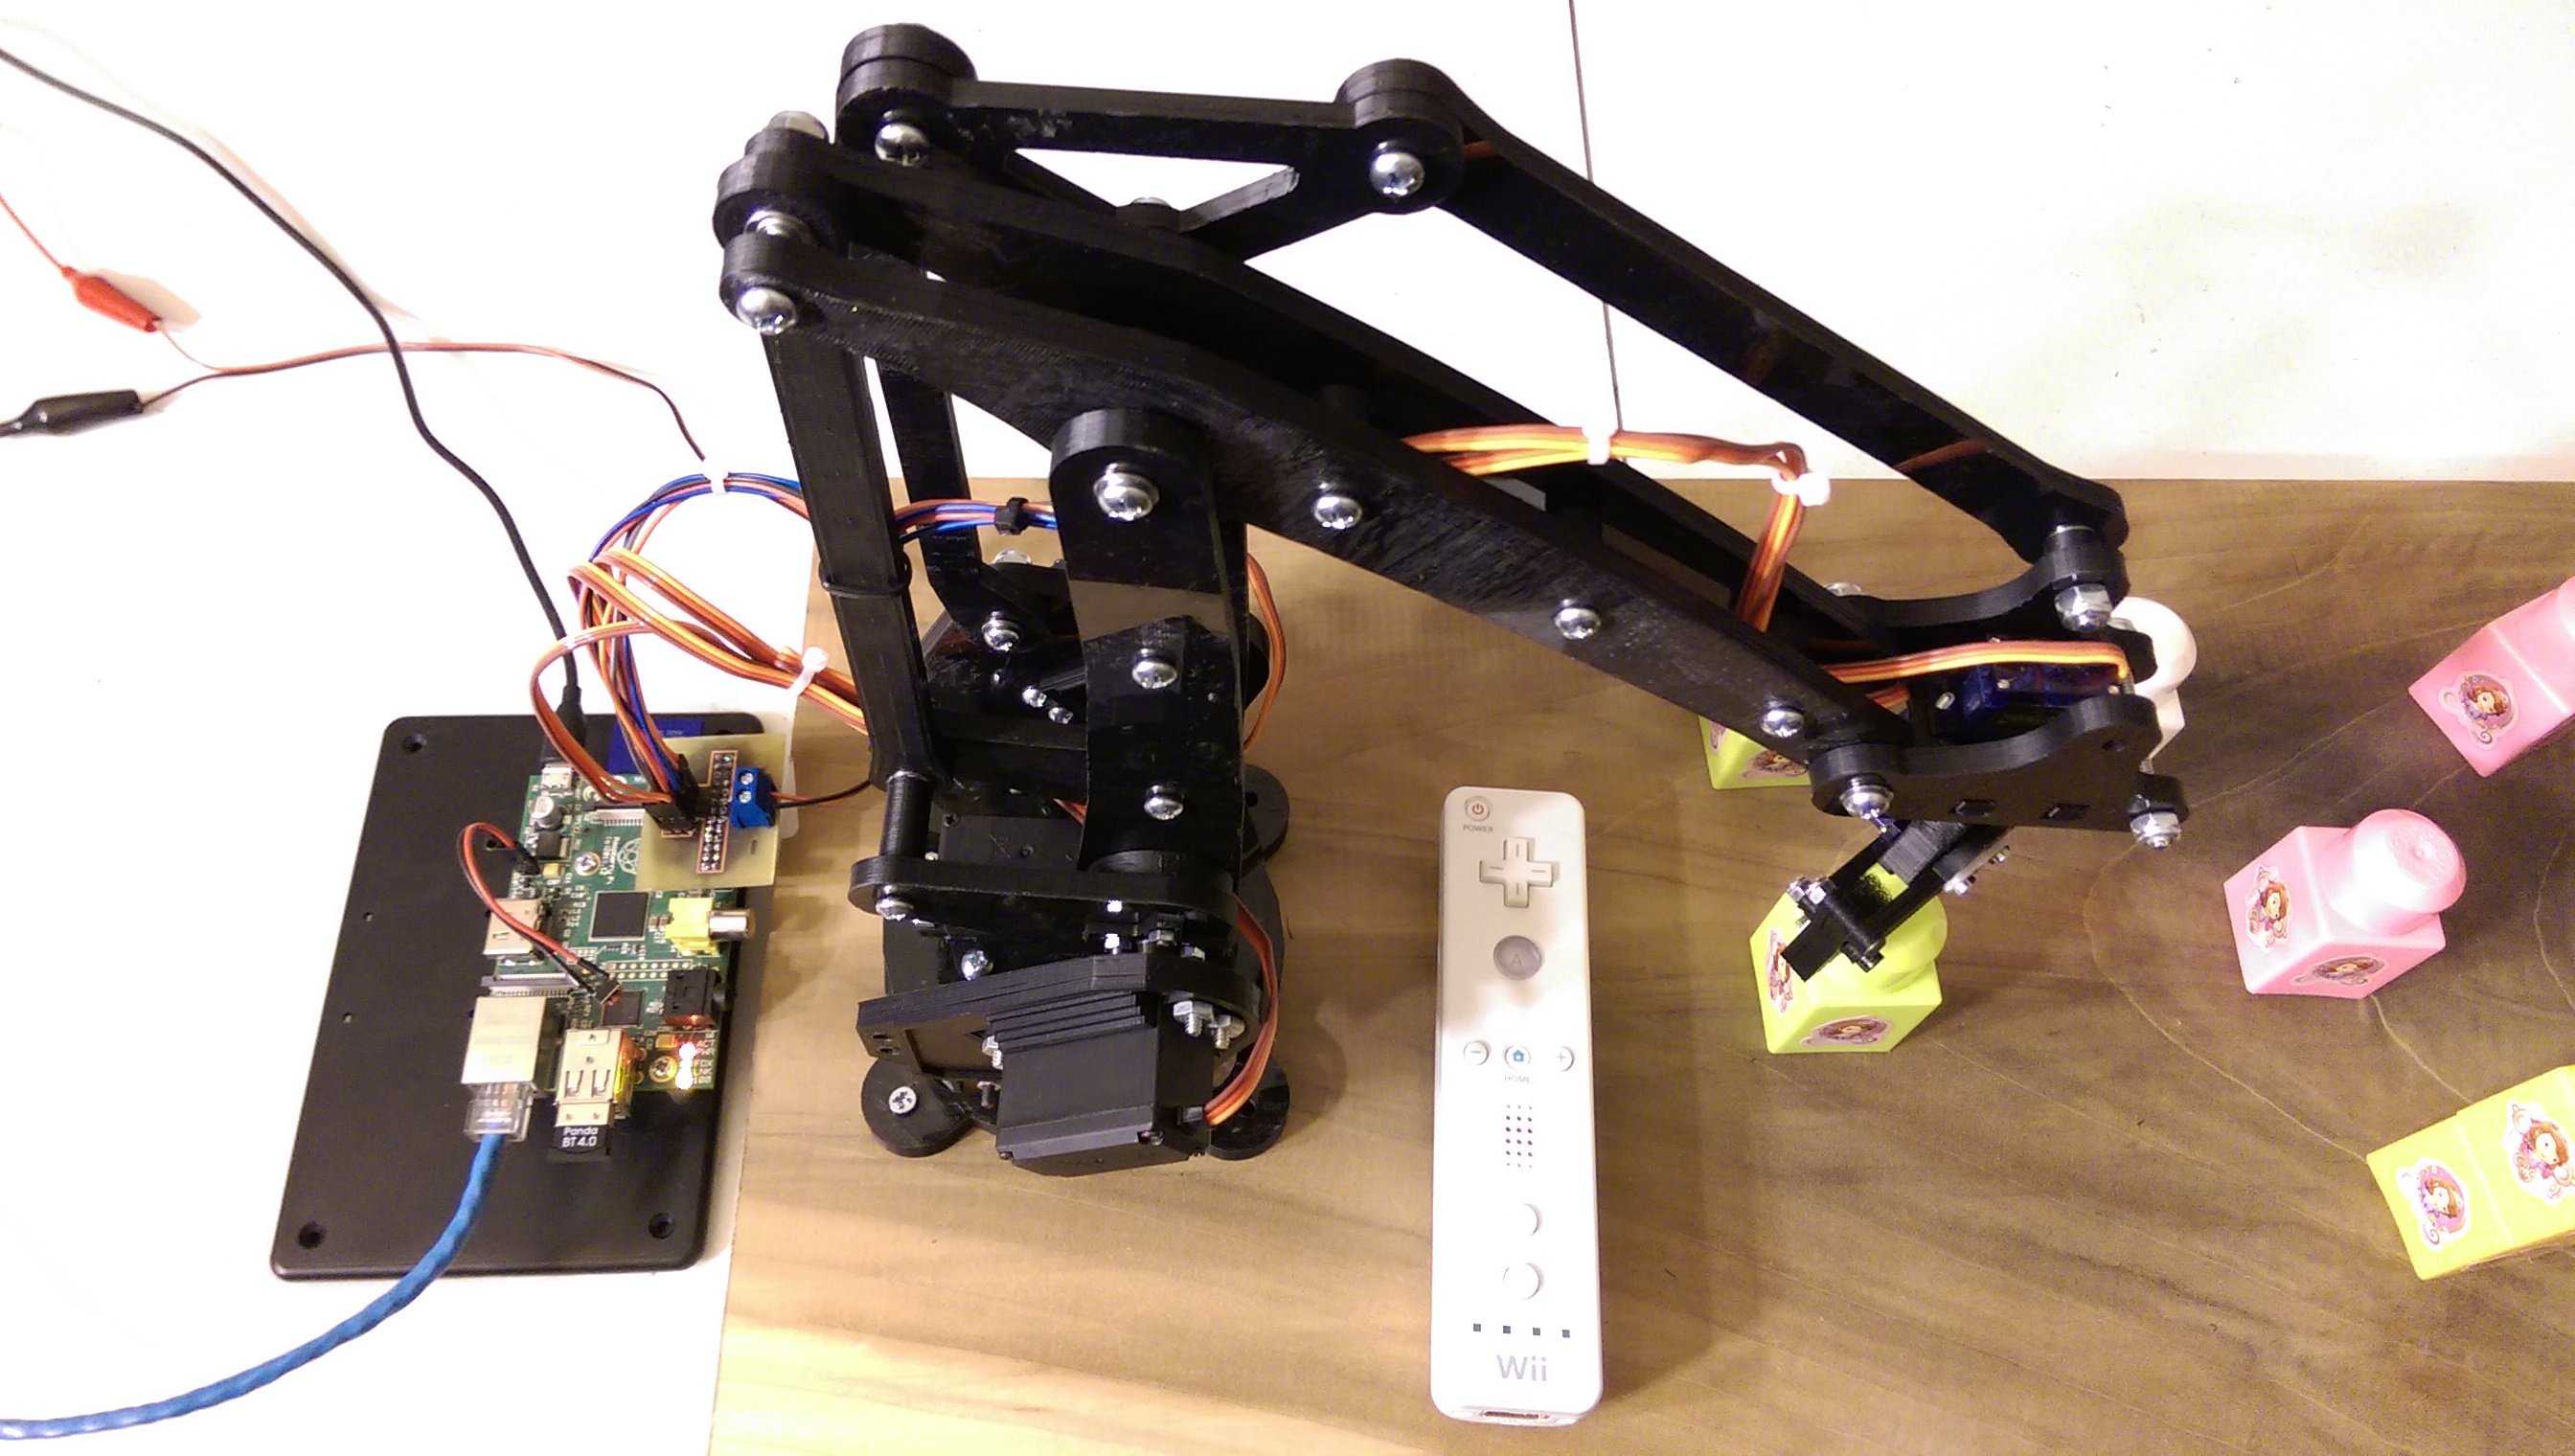 3D Printed Robot Arm with Raspberry Pi and Wii Remote